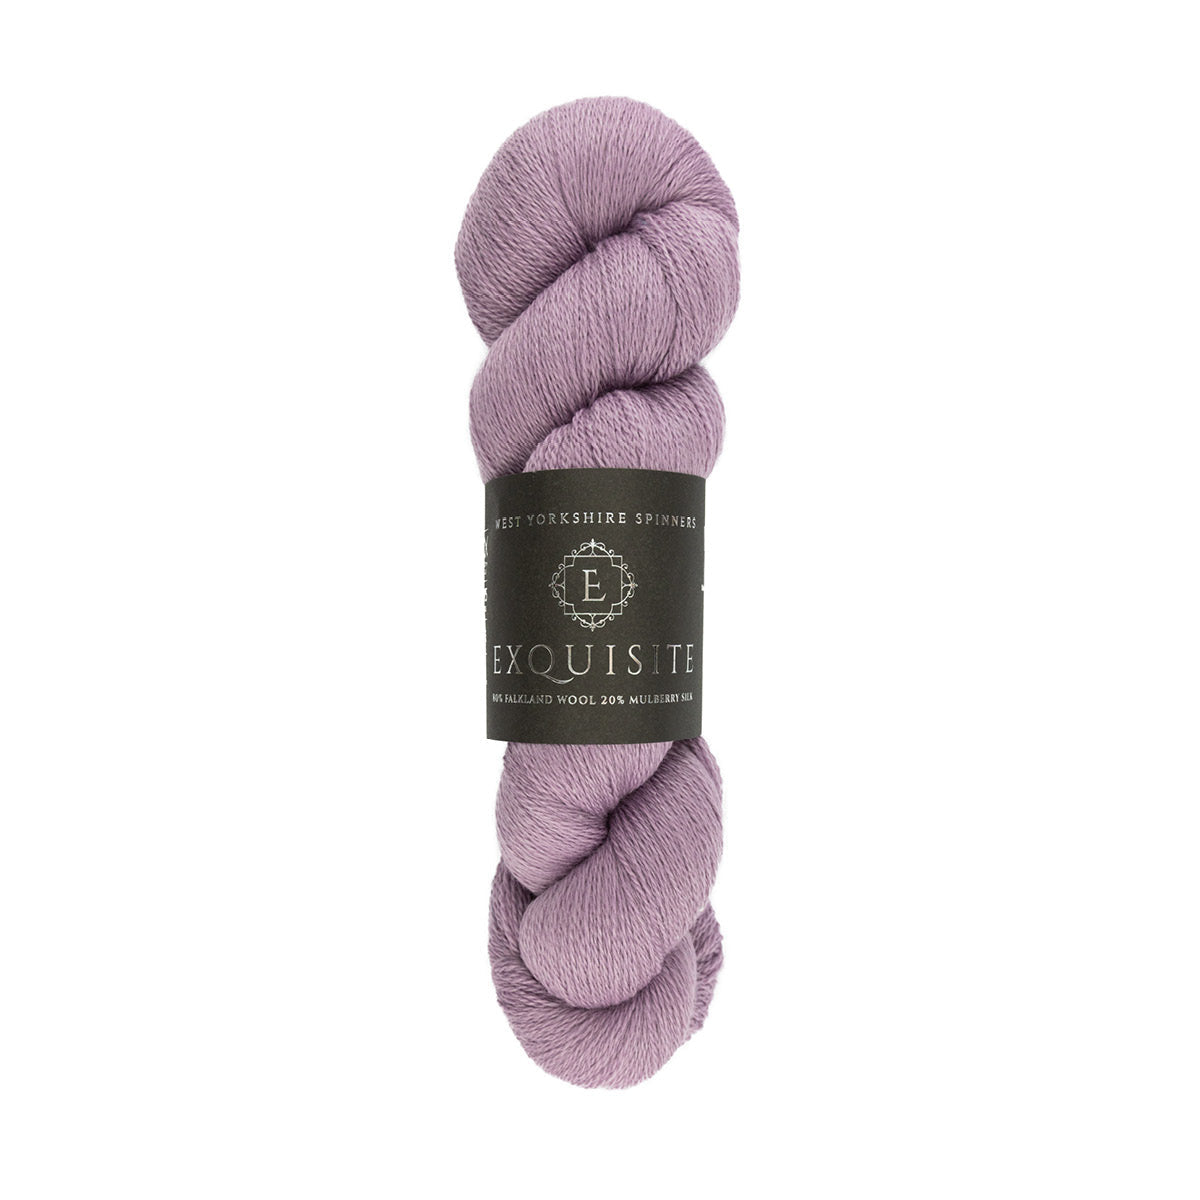 WYS West Yorkshire Spinners Exquisite Lace hank or skein in light purple, lilac shade portabello 525